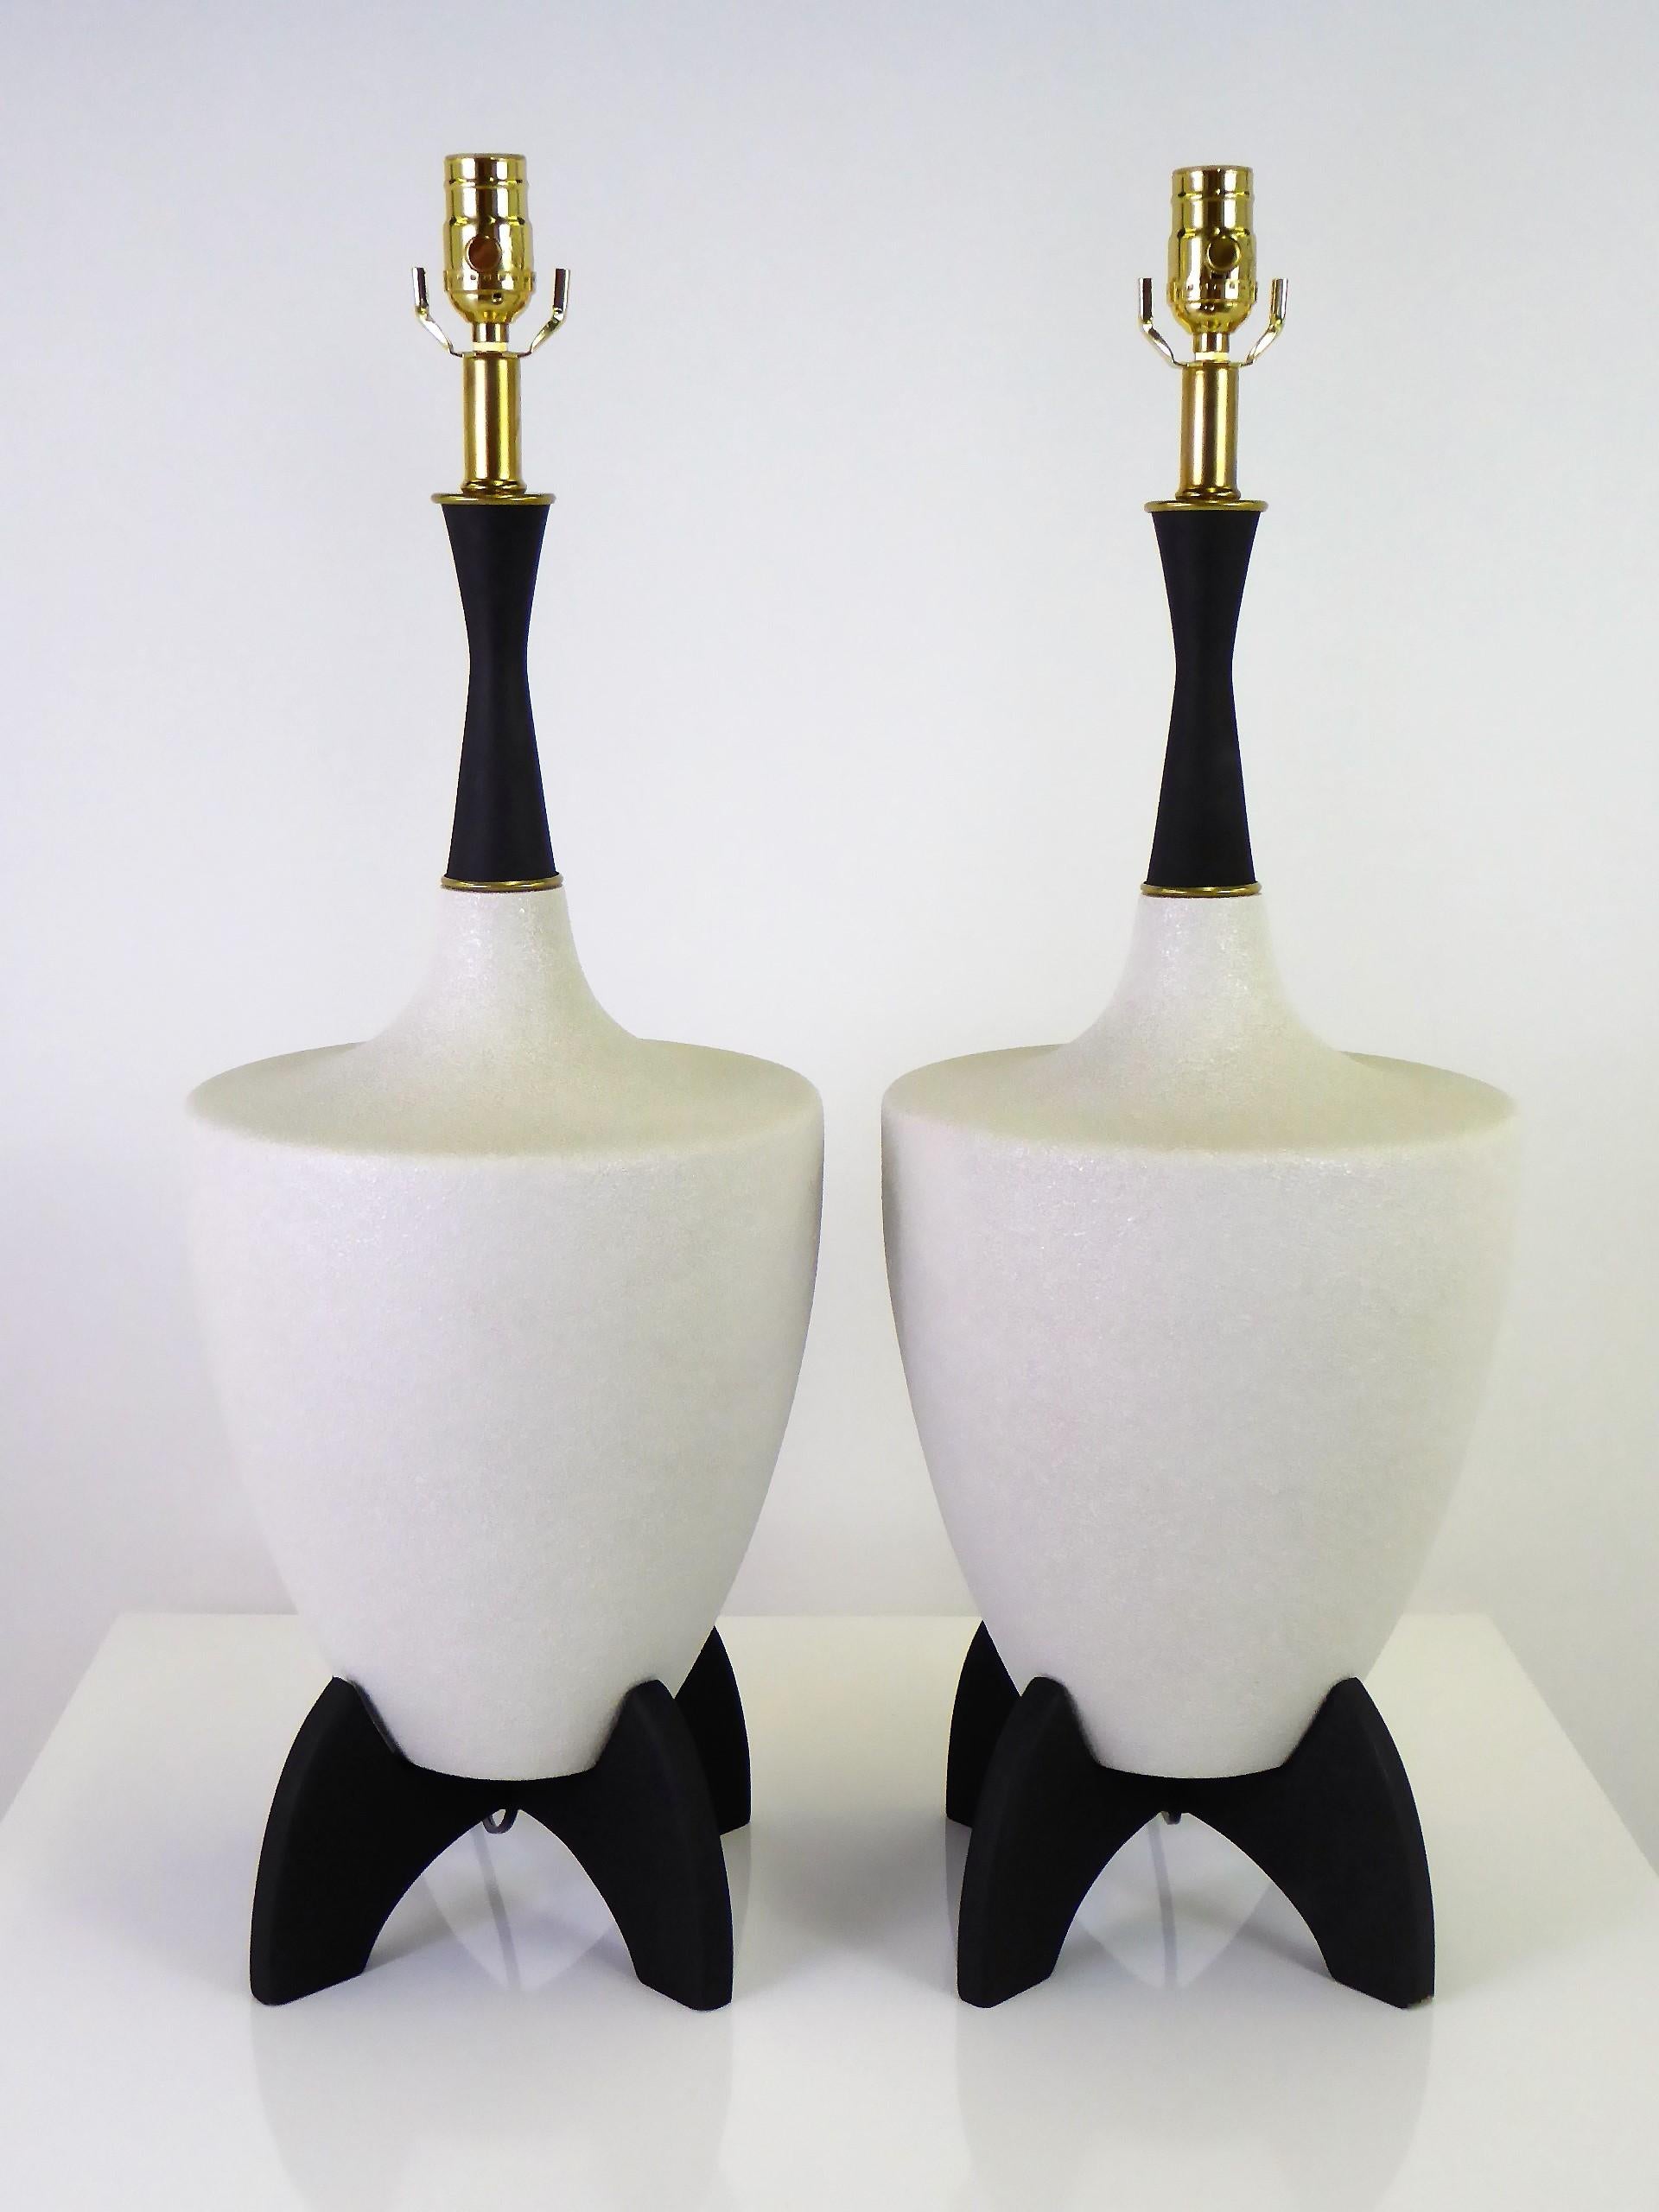 Mid-Century Modern pair of urn shape cream color pebble glaze ceramic with black wooden stand and neck table lamps, 1950s. With brass accents, the lamps have been fully restored, rewired and with new brass UL three level sockets. Takes medium base